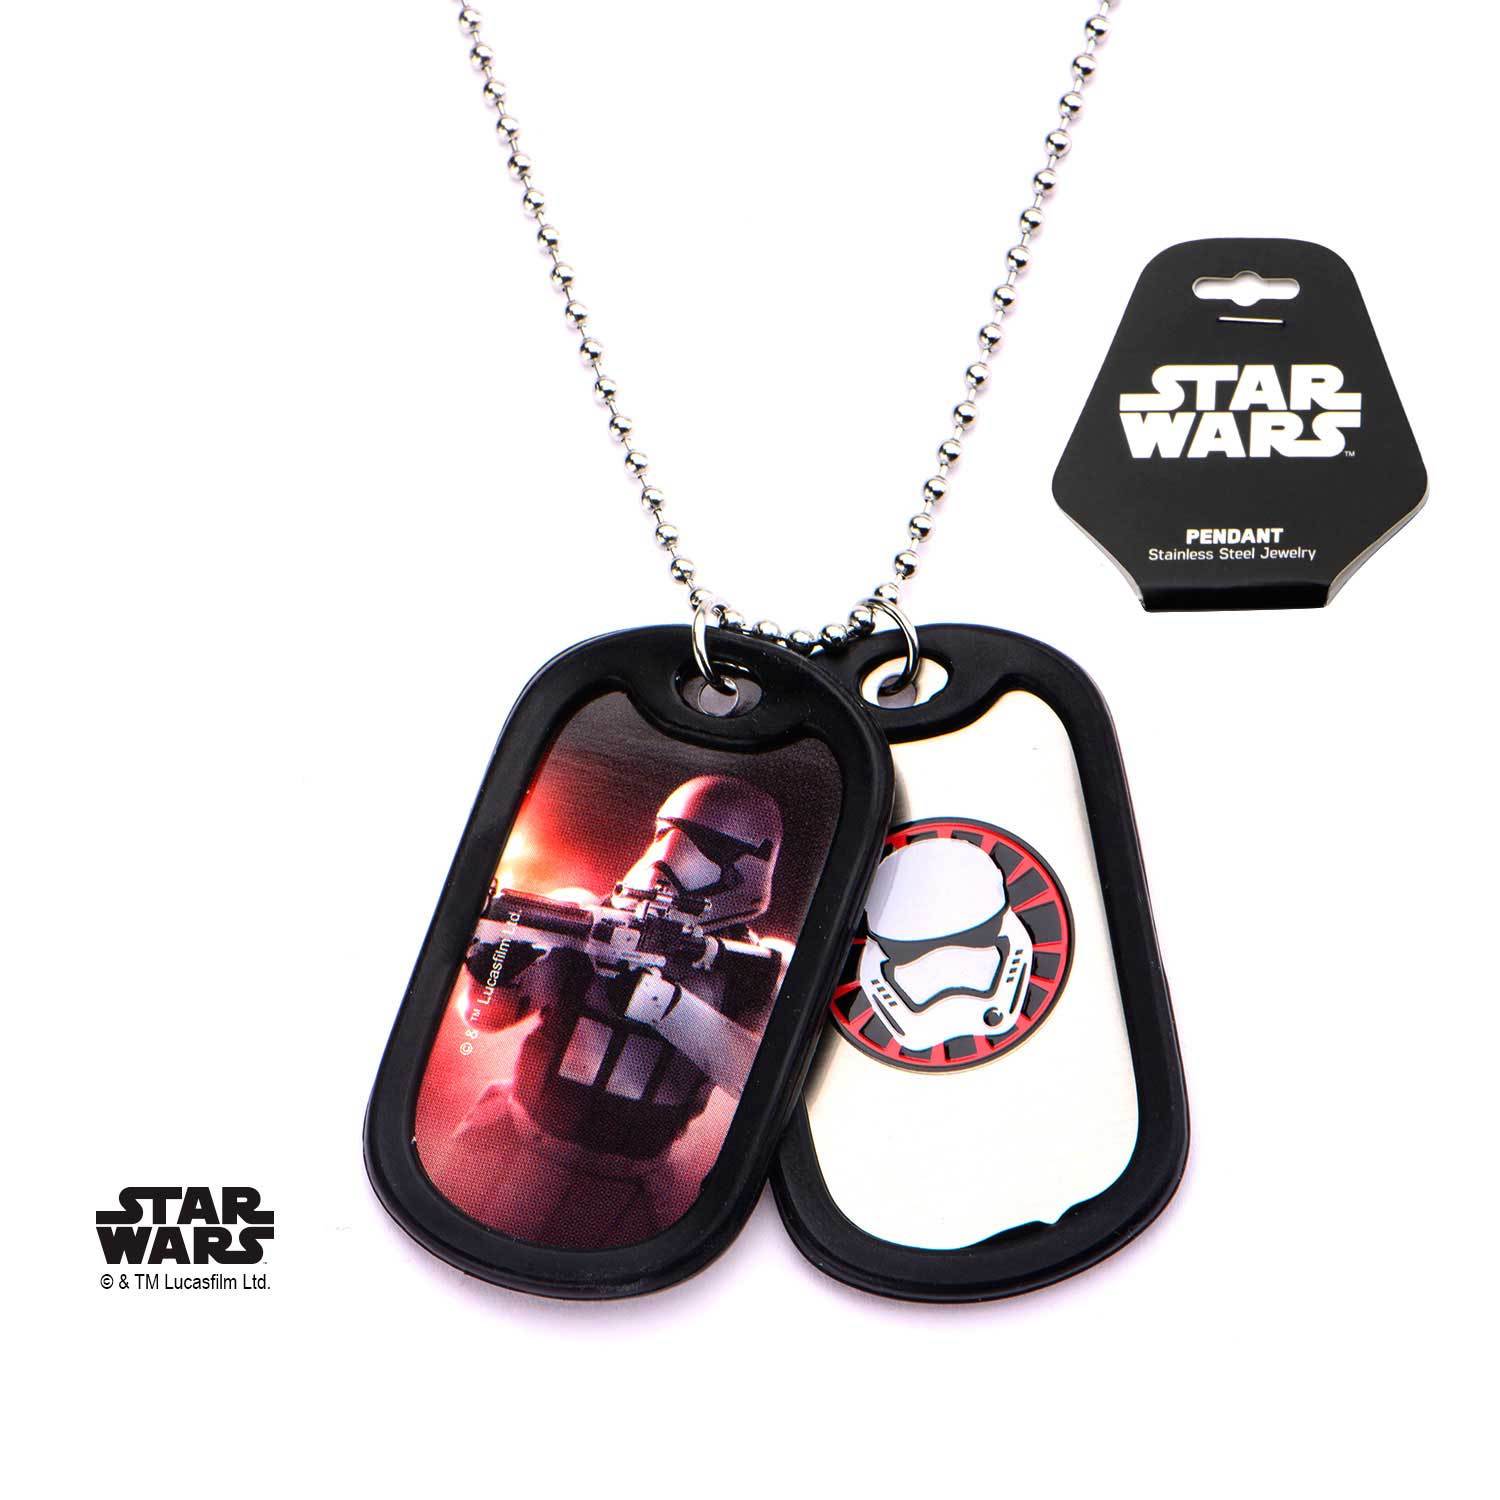 Star Wars Episode 7 Stormtrooper Rubber Silencer Double Dog Tag Pendant Necklace